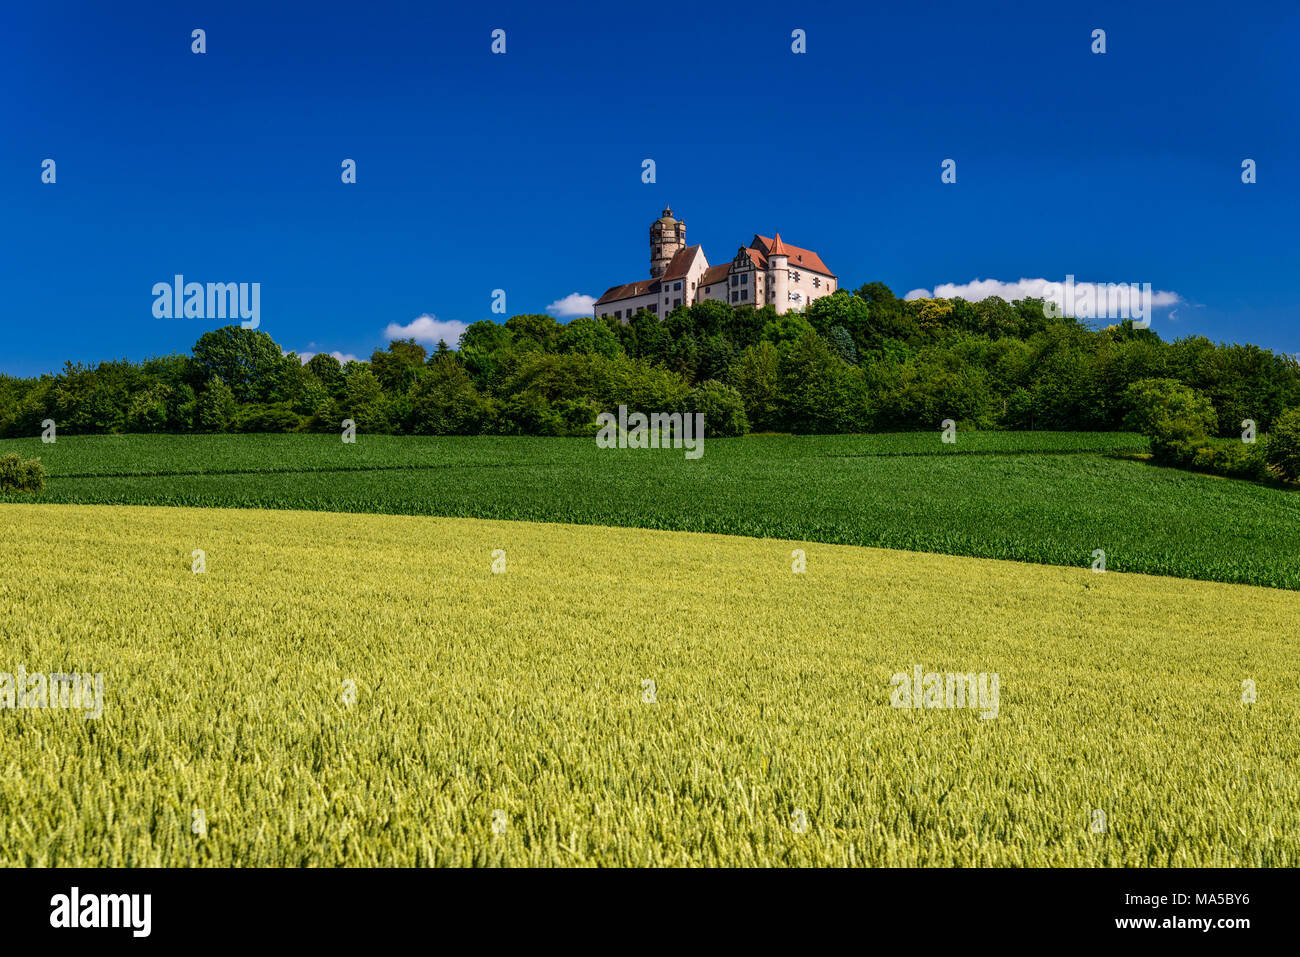 Germany, Hesse, administrative district of Main-Kinzig, Ronneburg, district Altwiedermus, Burg Ronneburg (castle) Stock Photo